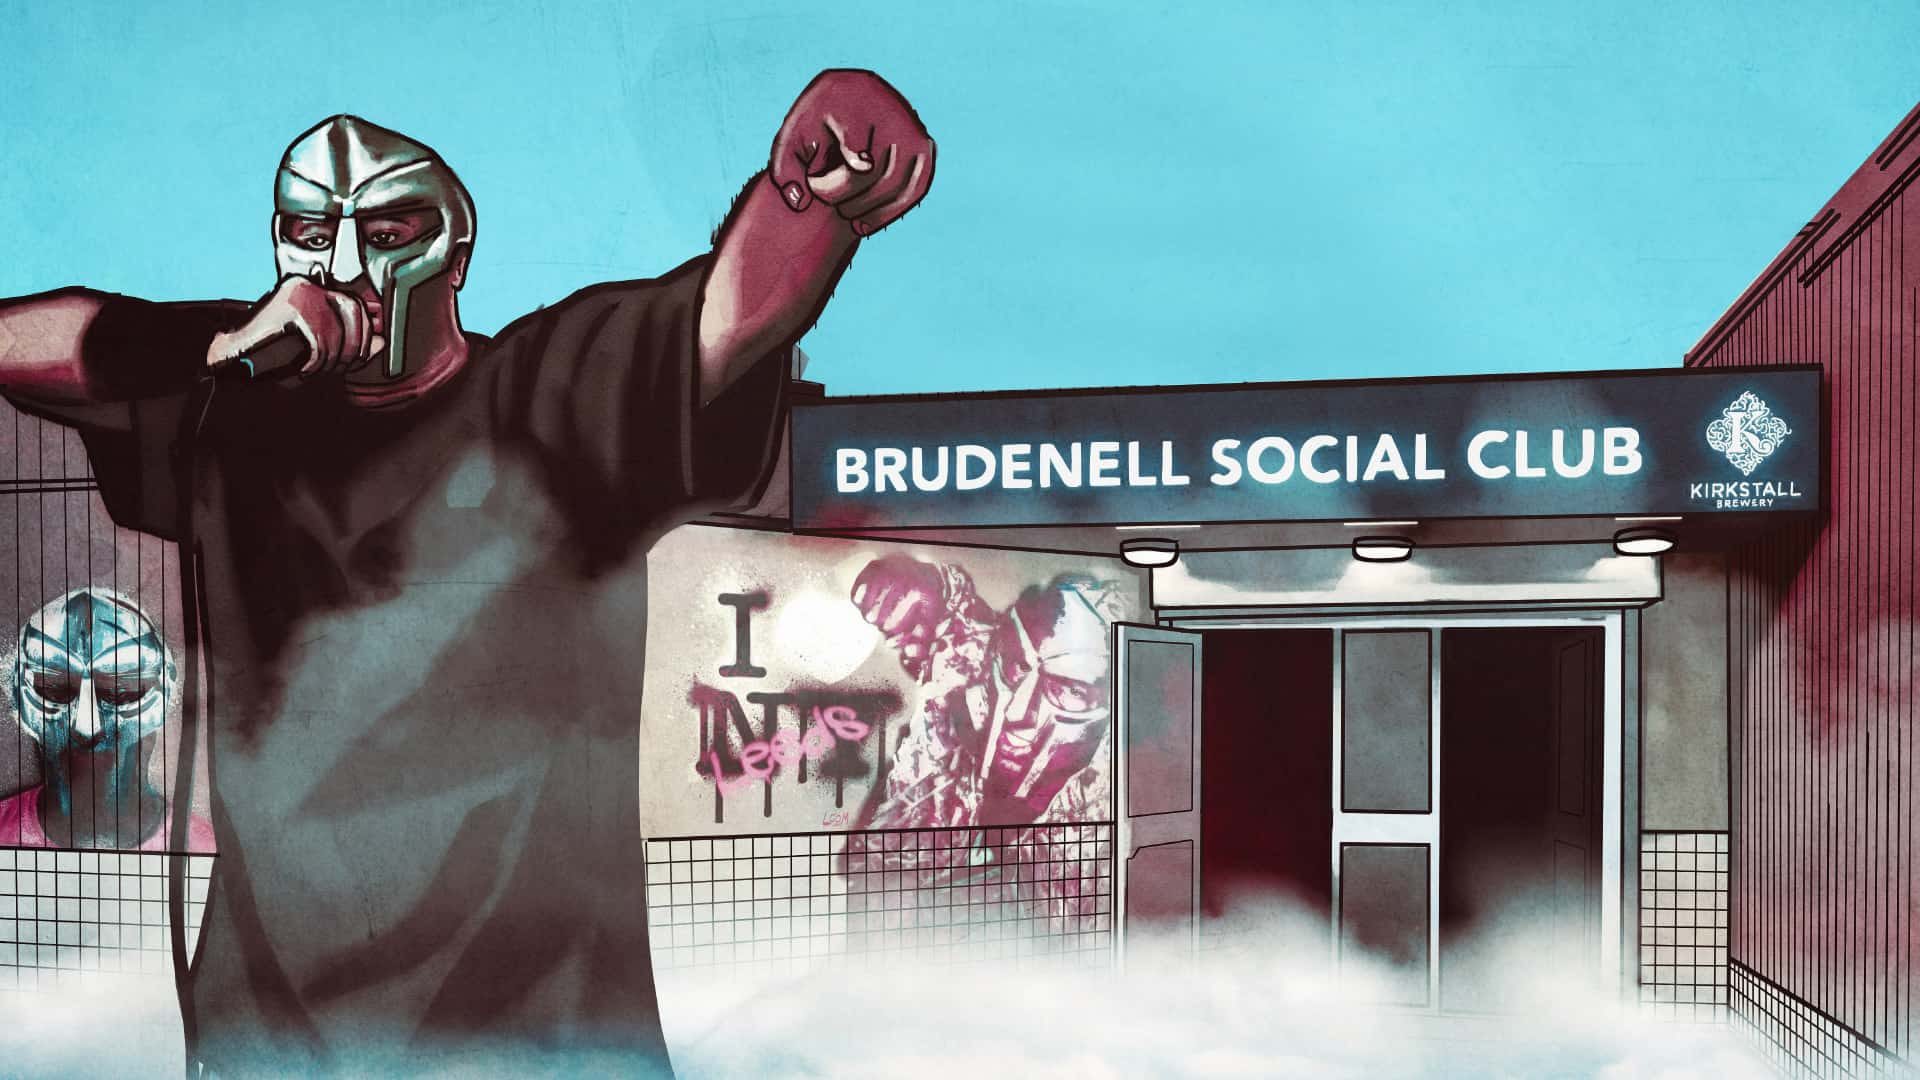 An illustration of MF DOOM standing outside his (rumoured) local in Leeds, the Brudenell Social Club